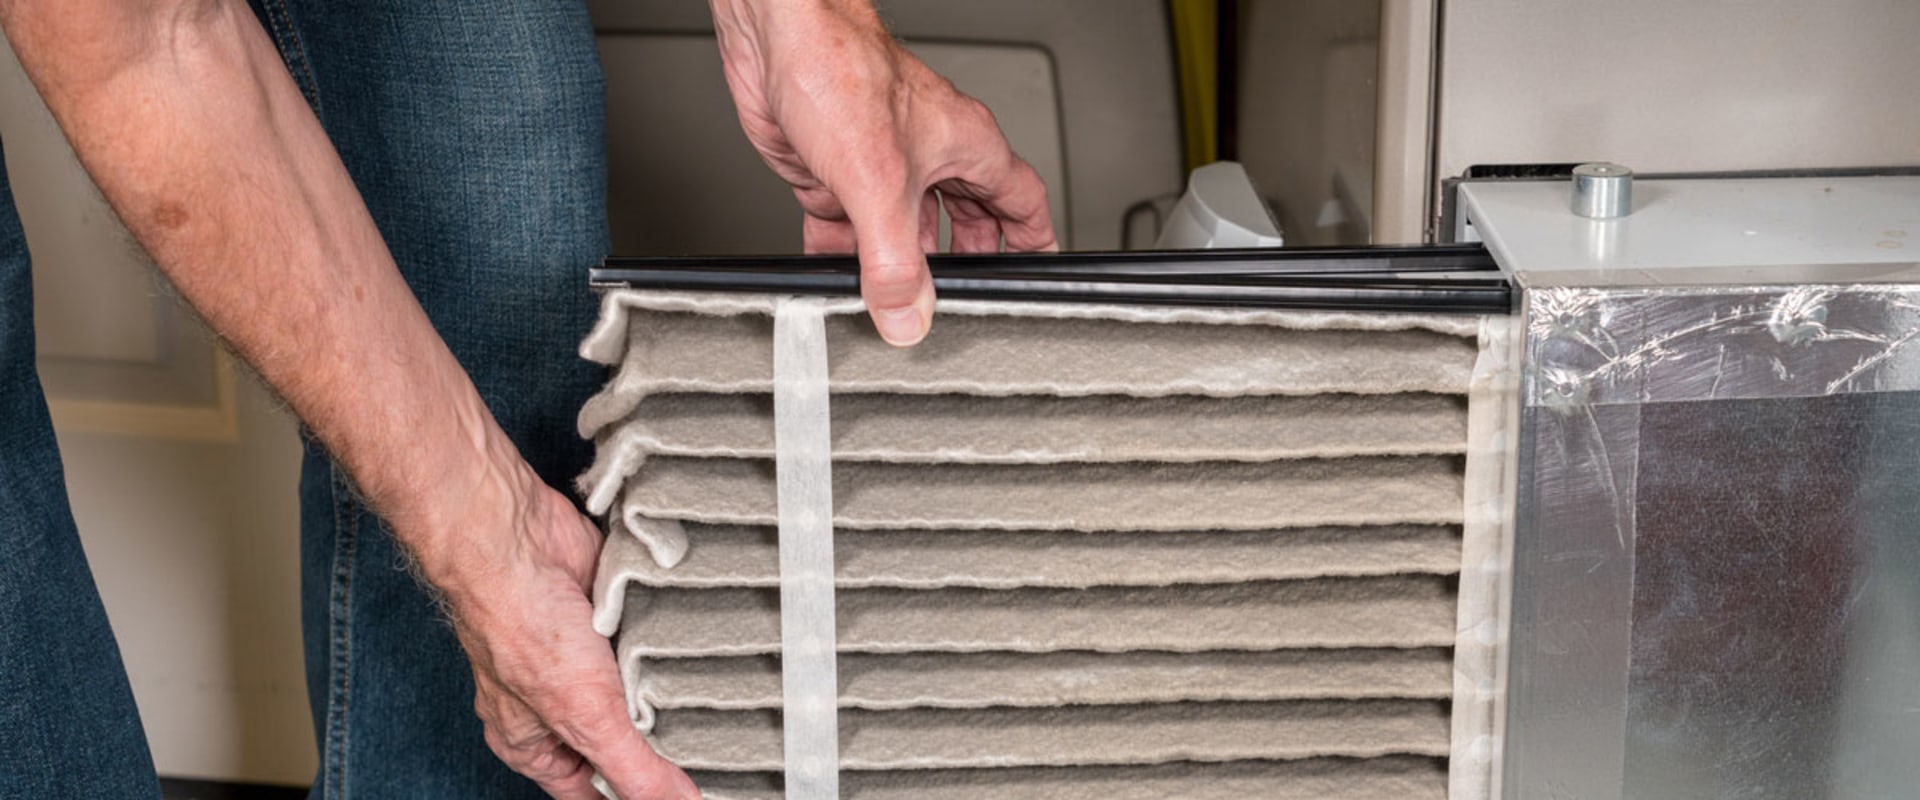 The Ultimate Guide to Choosing the Right Air Filter for Your Furnace